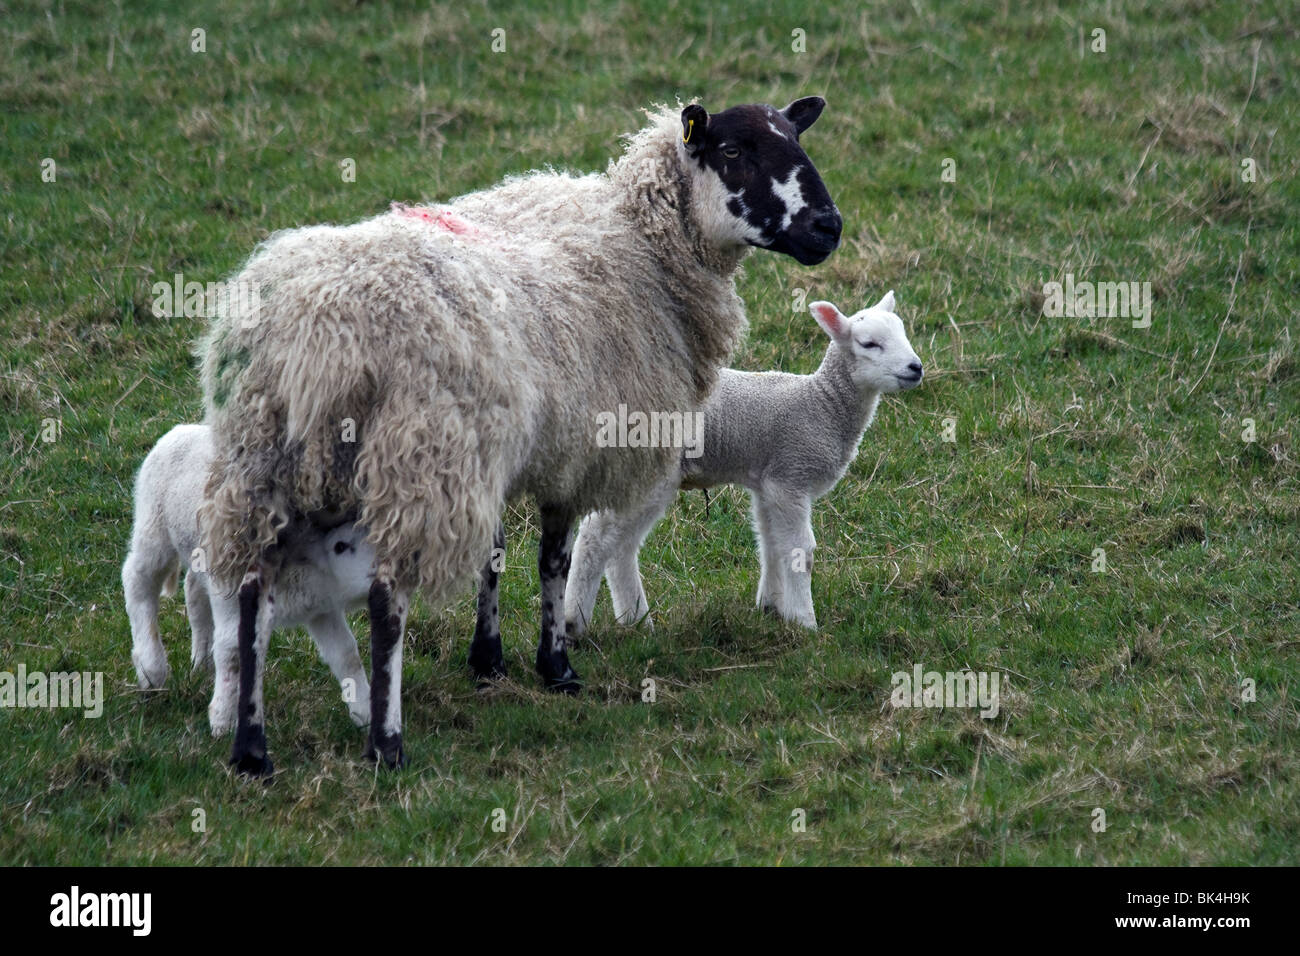 New born lambs and mother sheep. Stock Photo